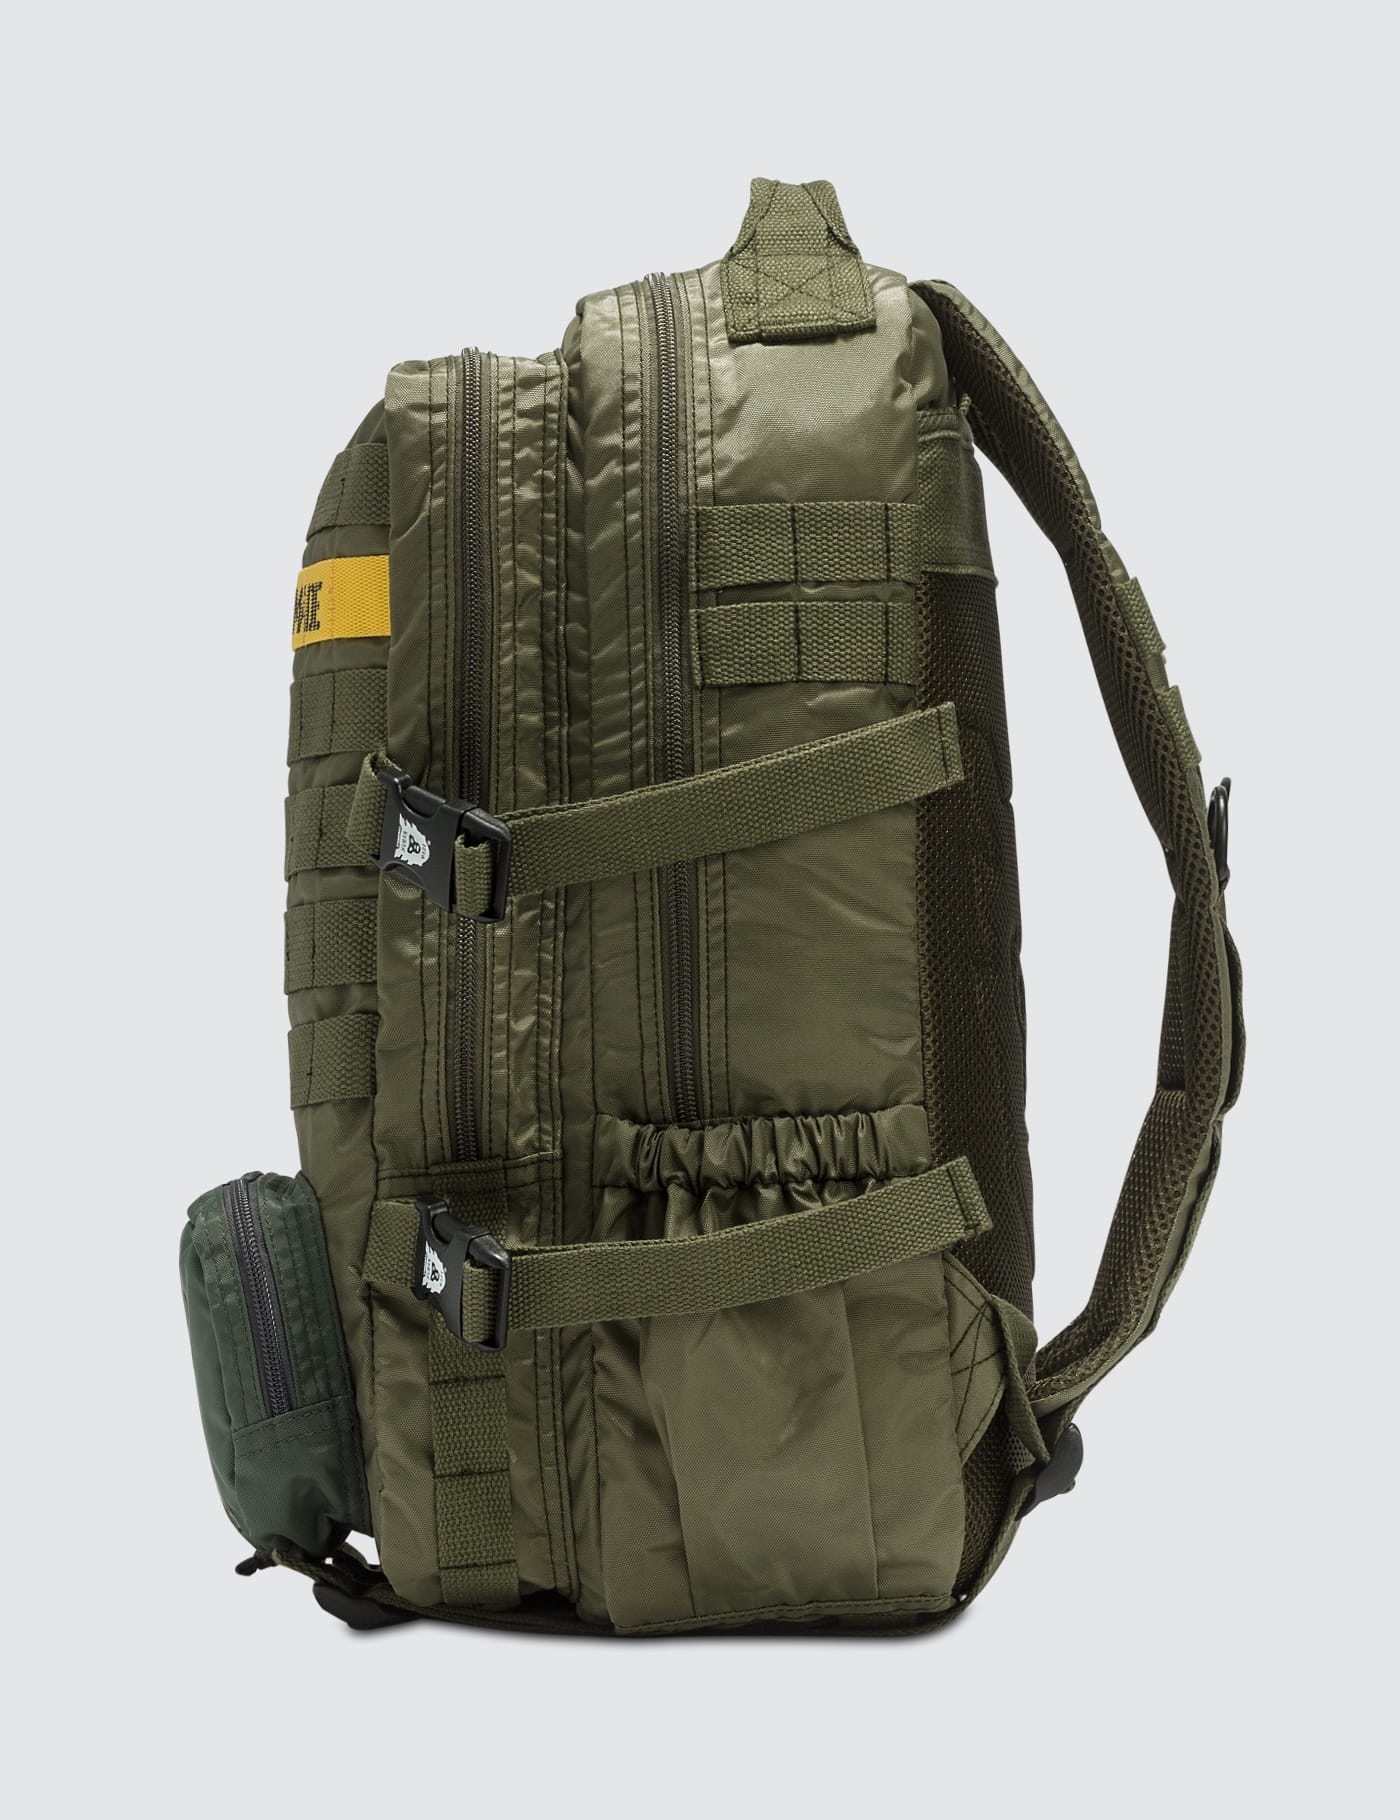 Human Made - Military Backpack | HBX - Globally Curated Fashion 